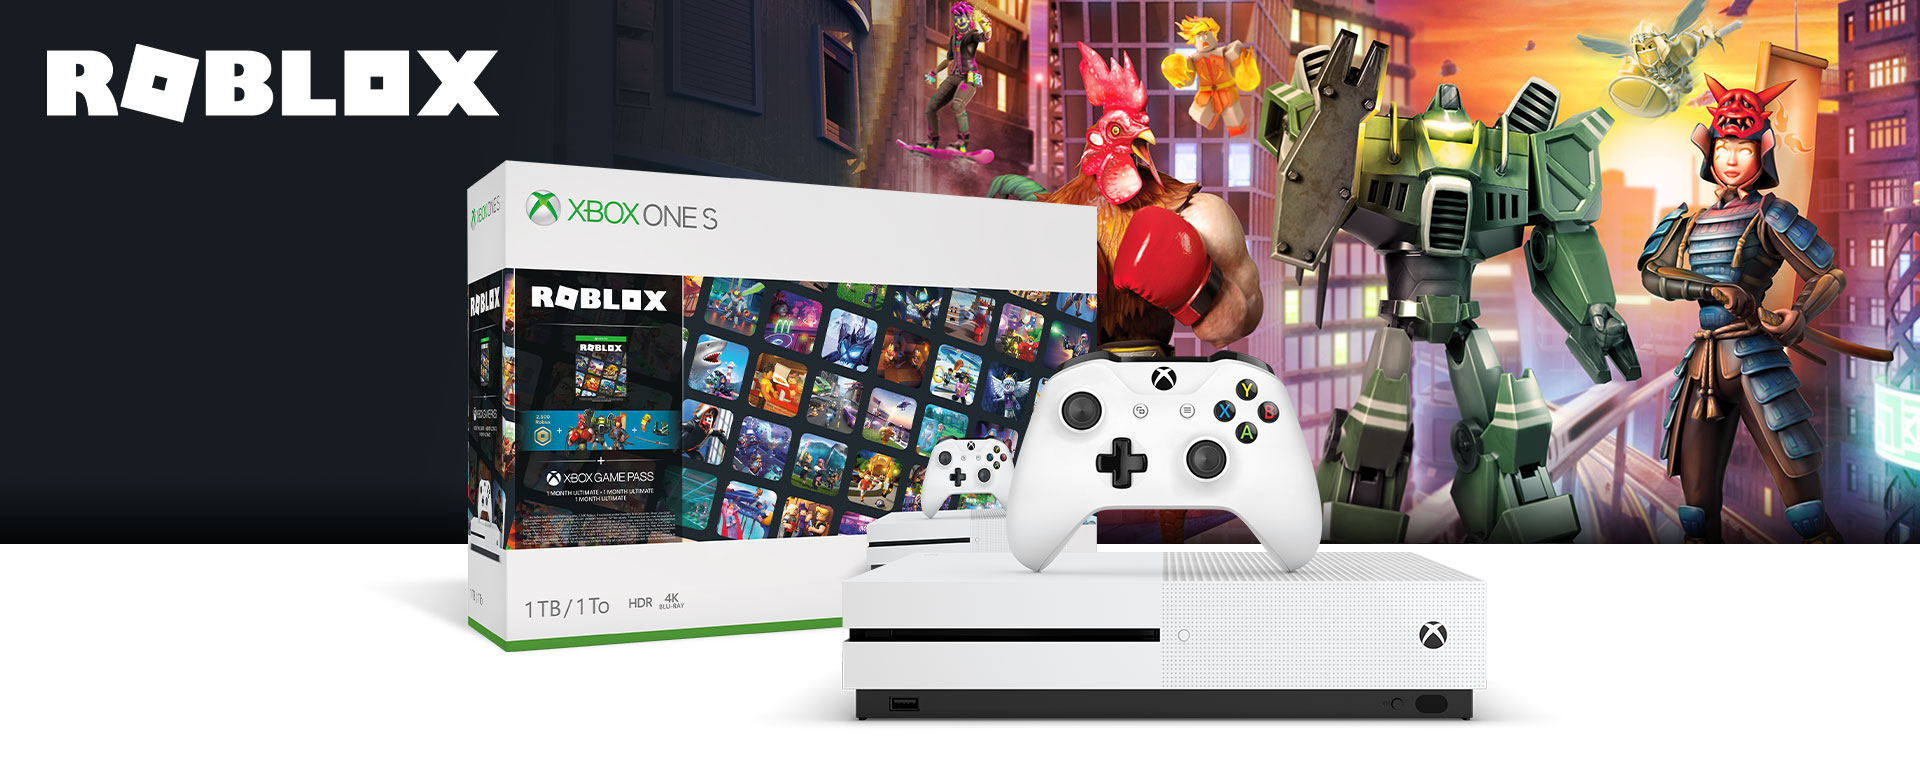 Can You Play Roblox On Xbox One Without Xbox Live Xbox One S Roblox Bundle 1tb Xbox